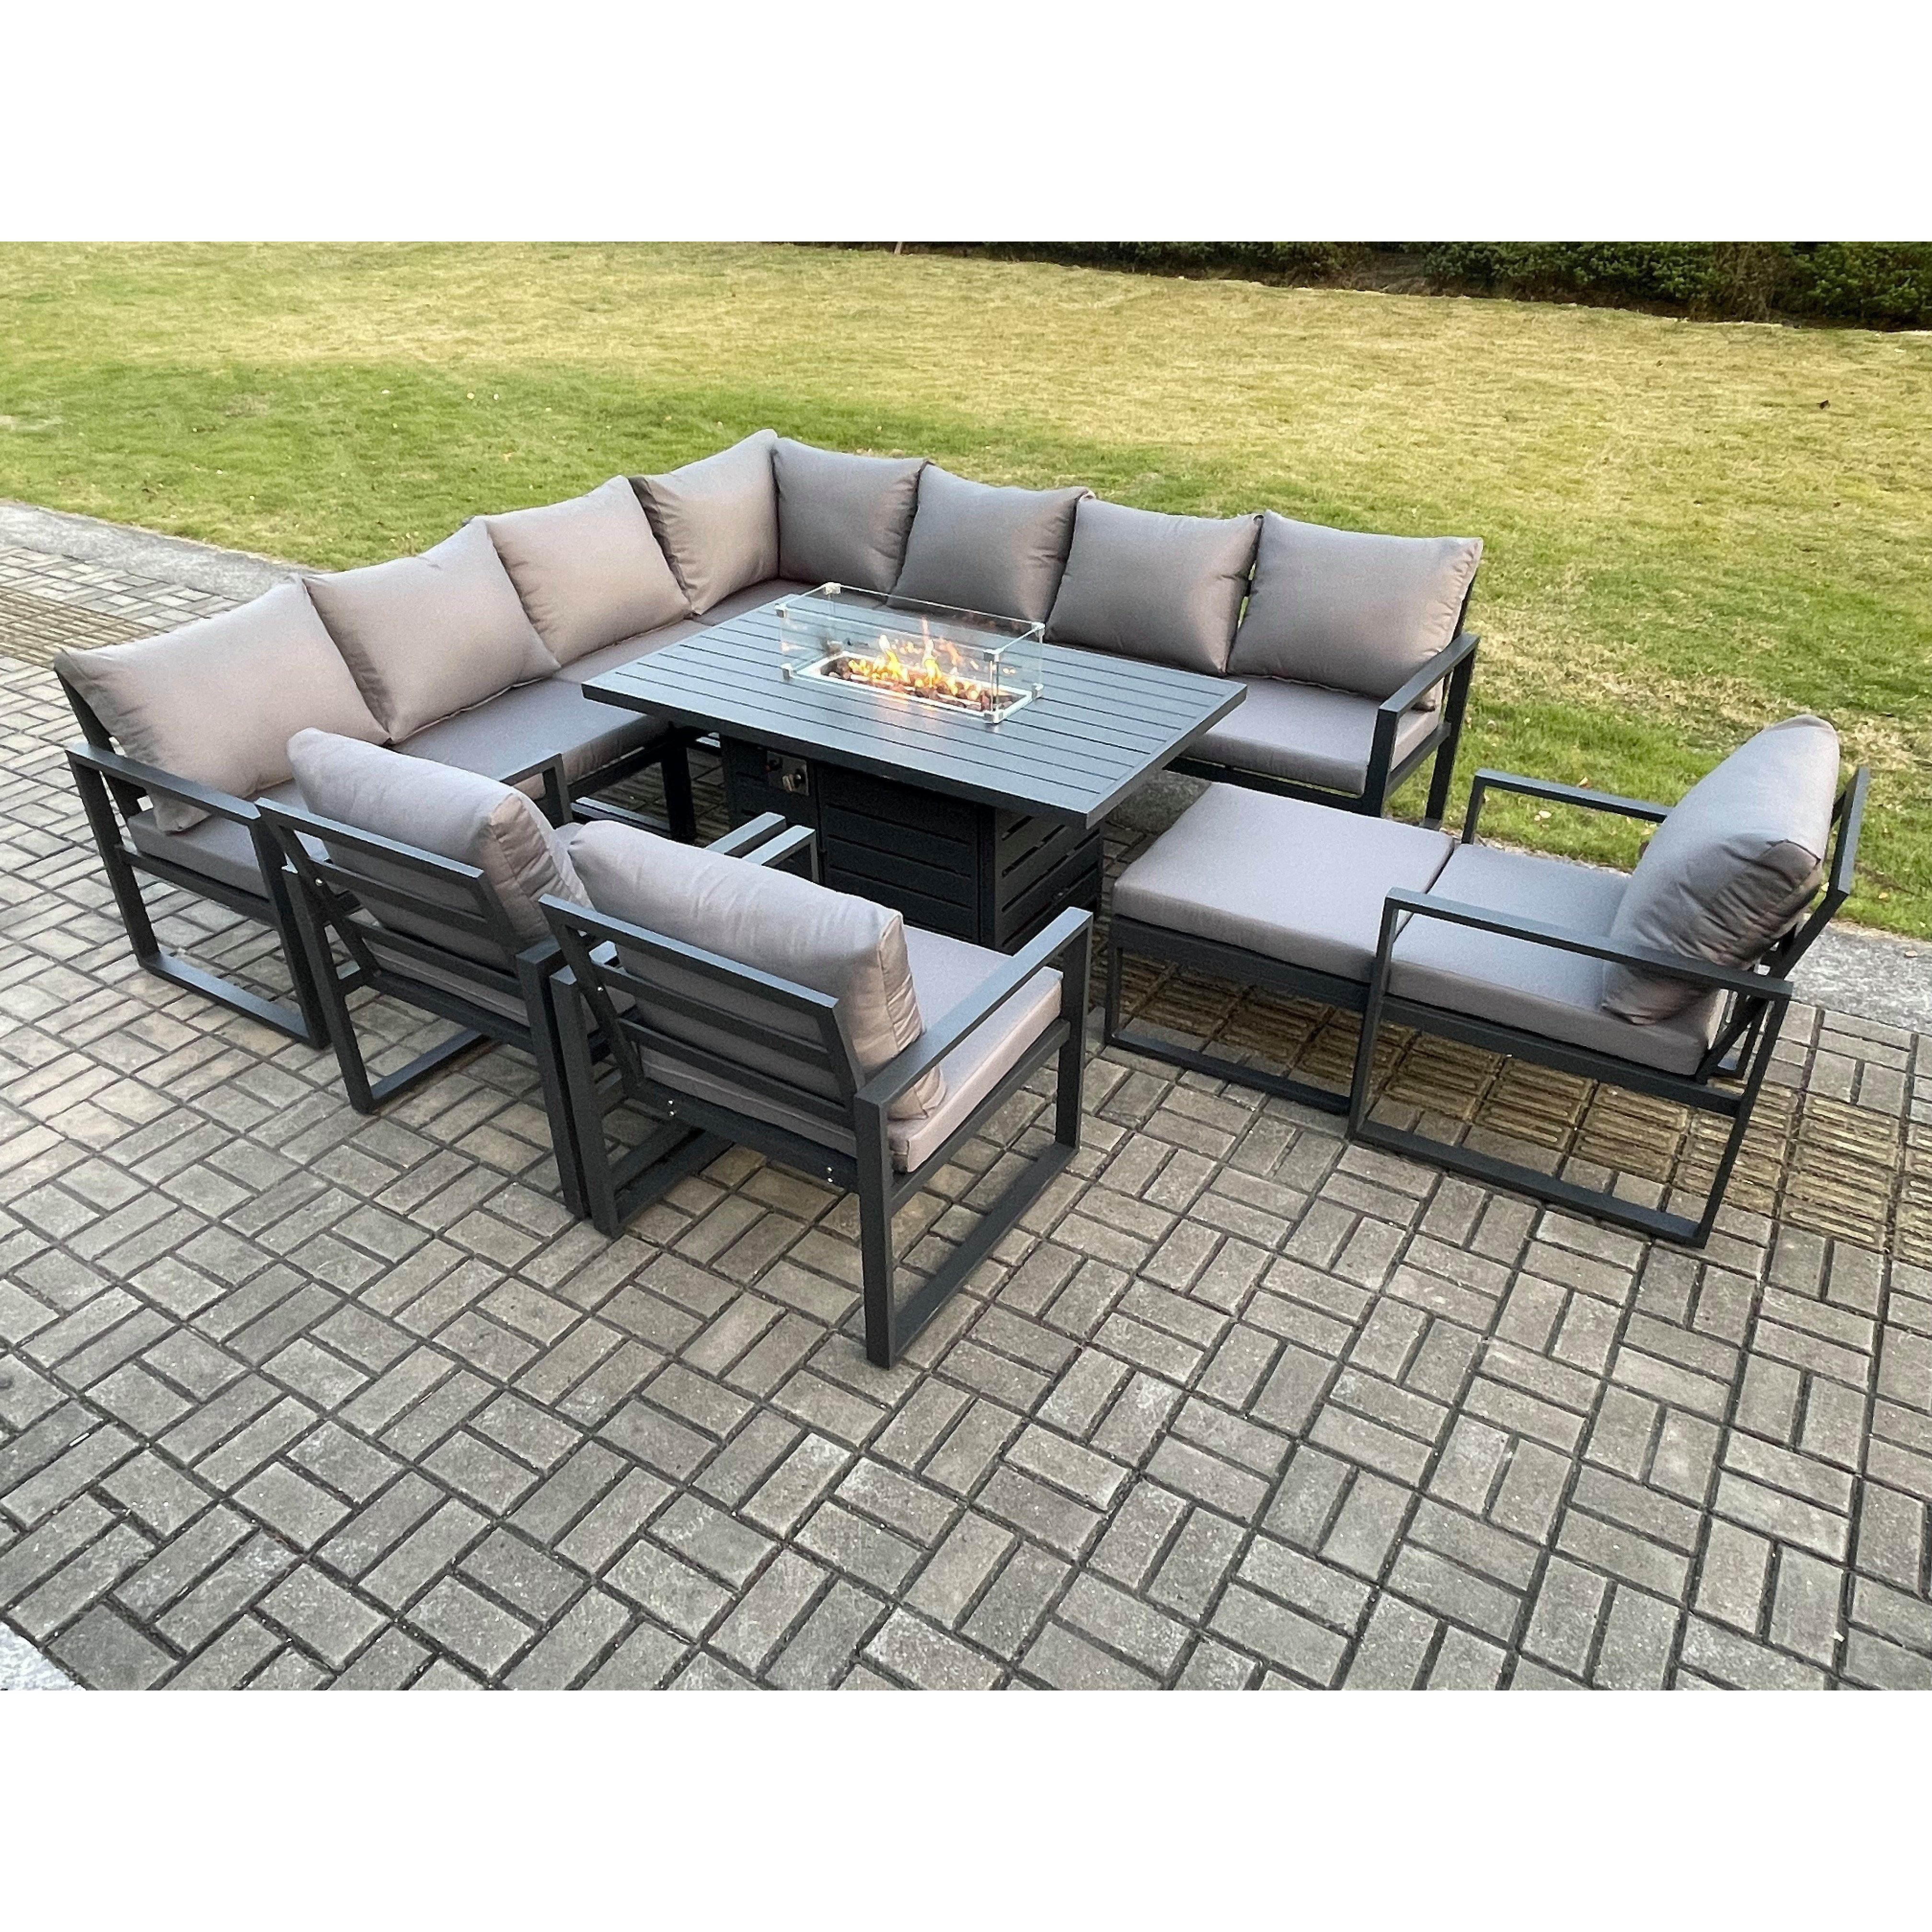 Aluminium 11 Seater Garden Furniture Outdoor Set Patio Lounge Sofa Gas Fire Pit Dining Table Set with 3 Chairs Big Footstool Dark Grey - image 1